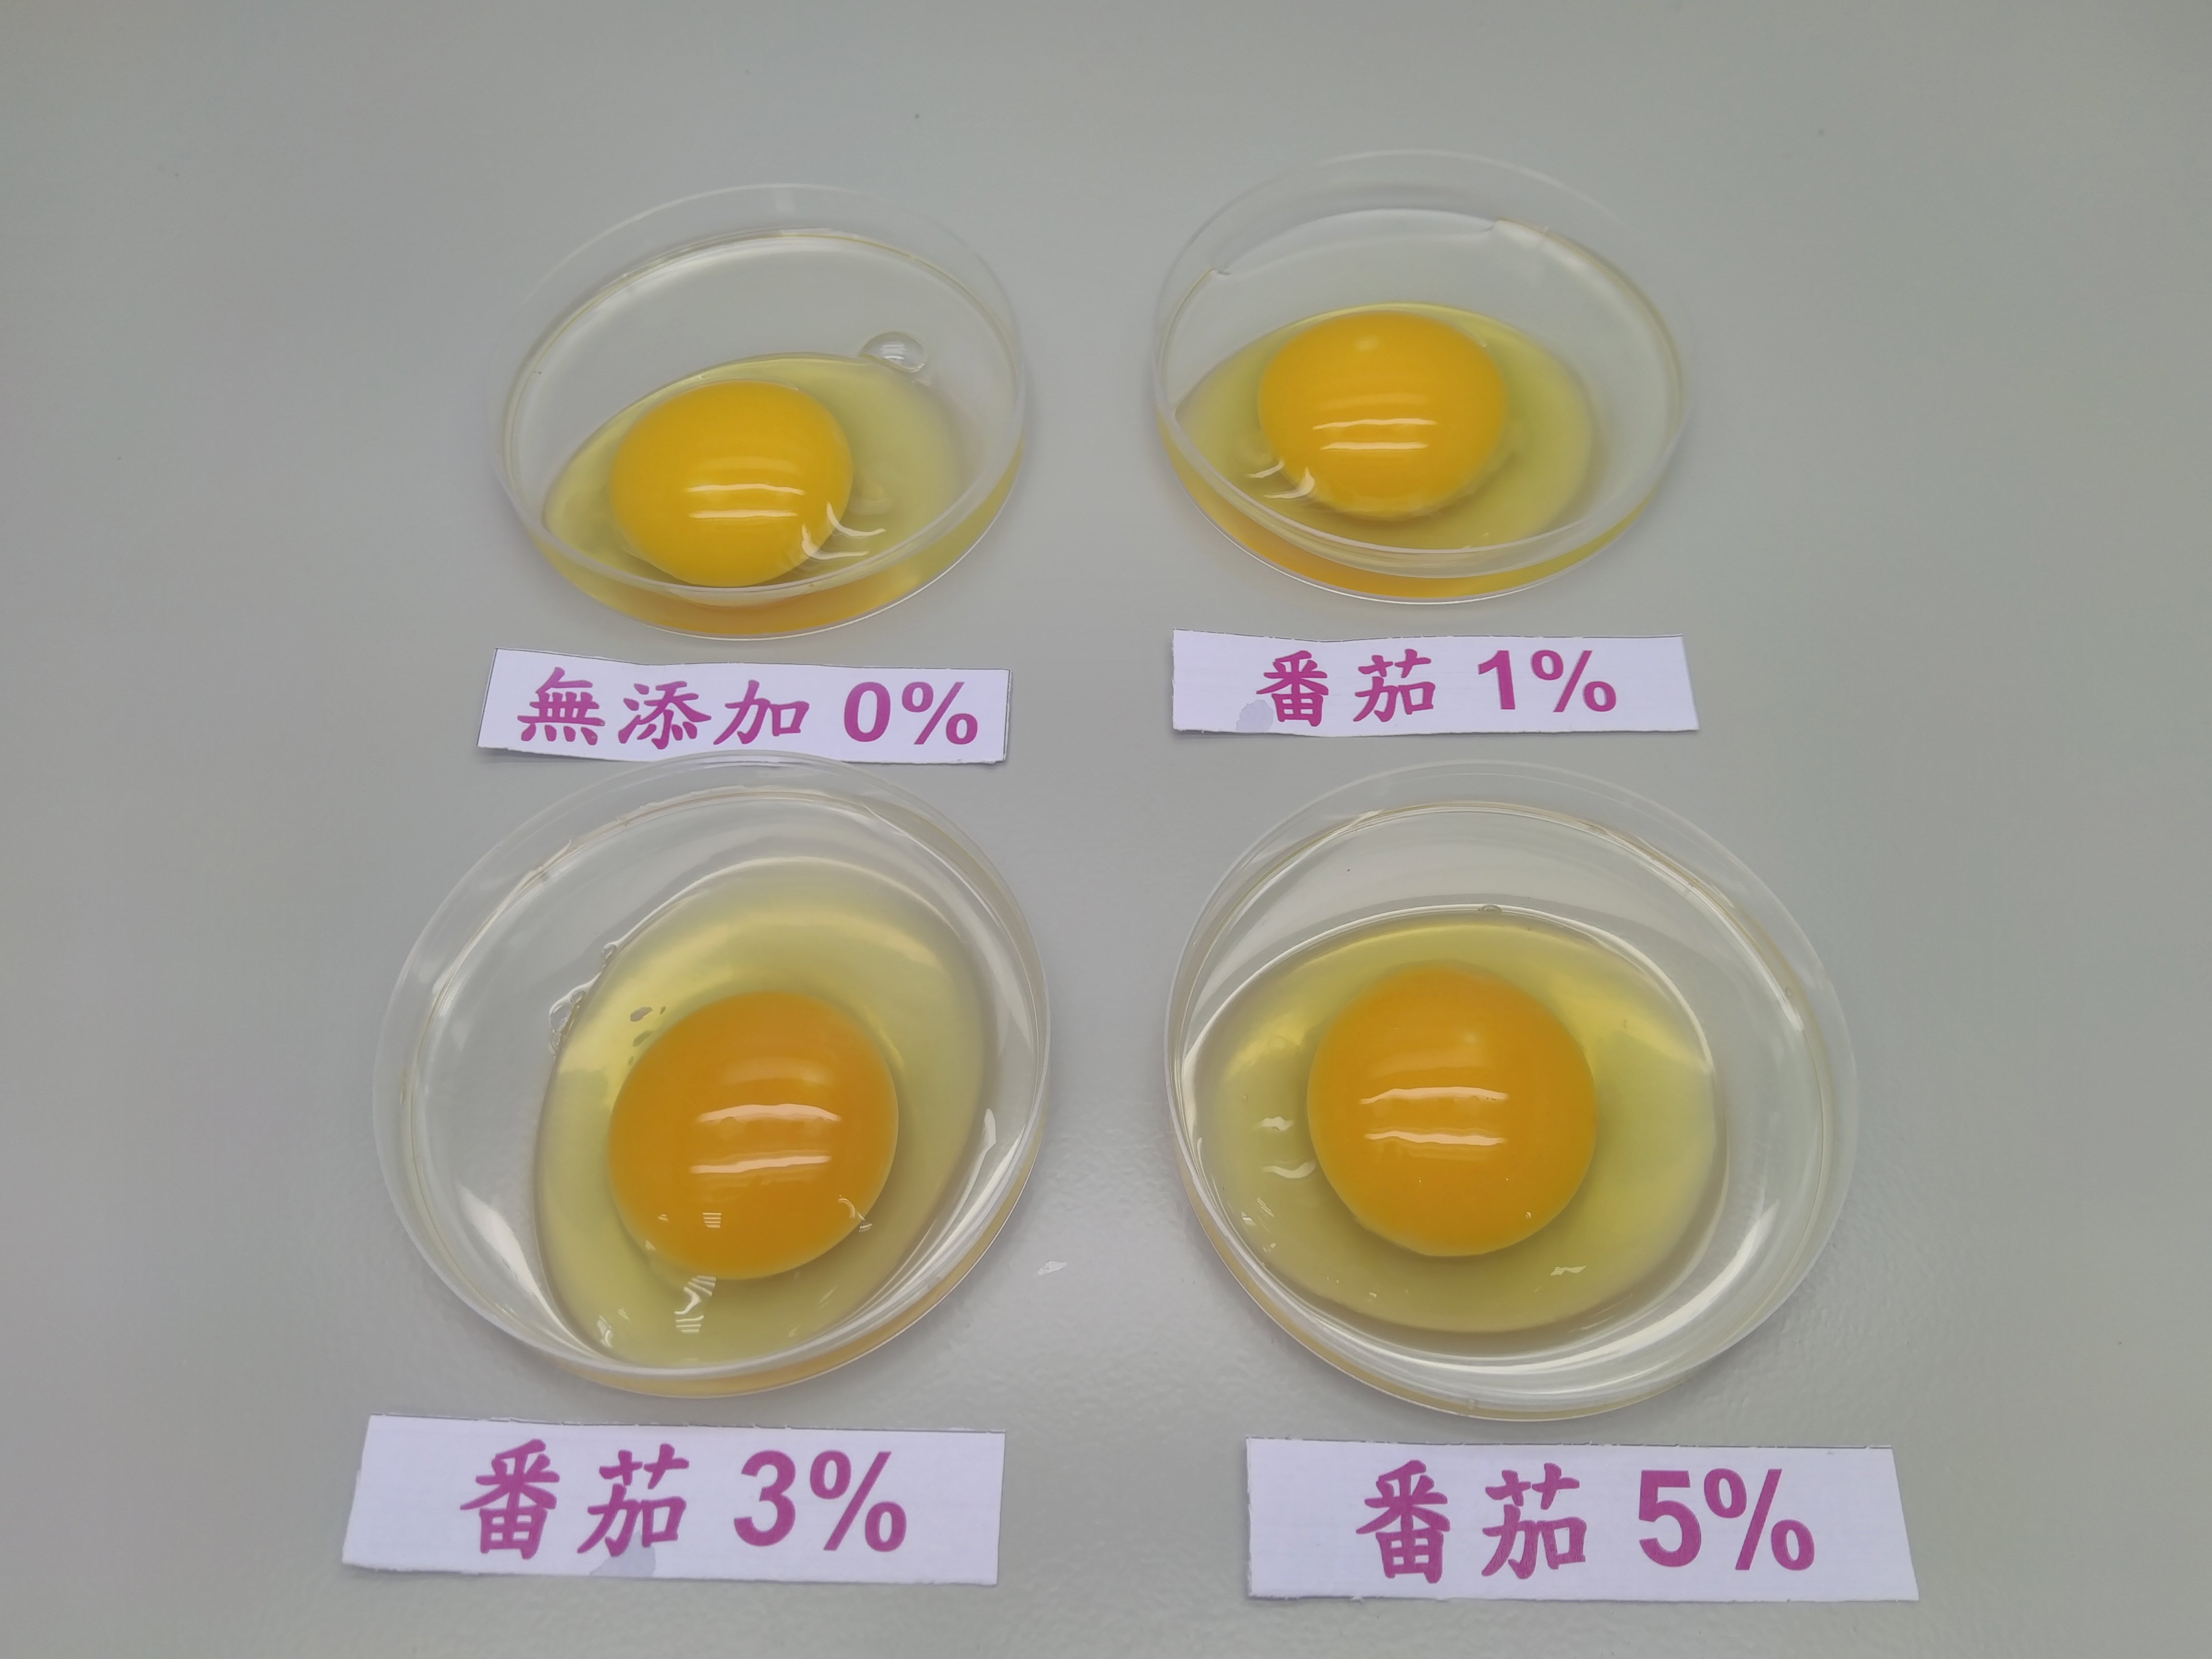 Adding at least 1% of tomato powder in diets increased egg yolk color.